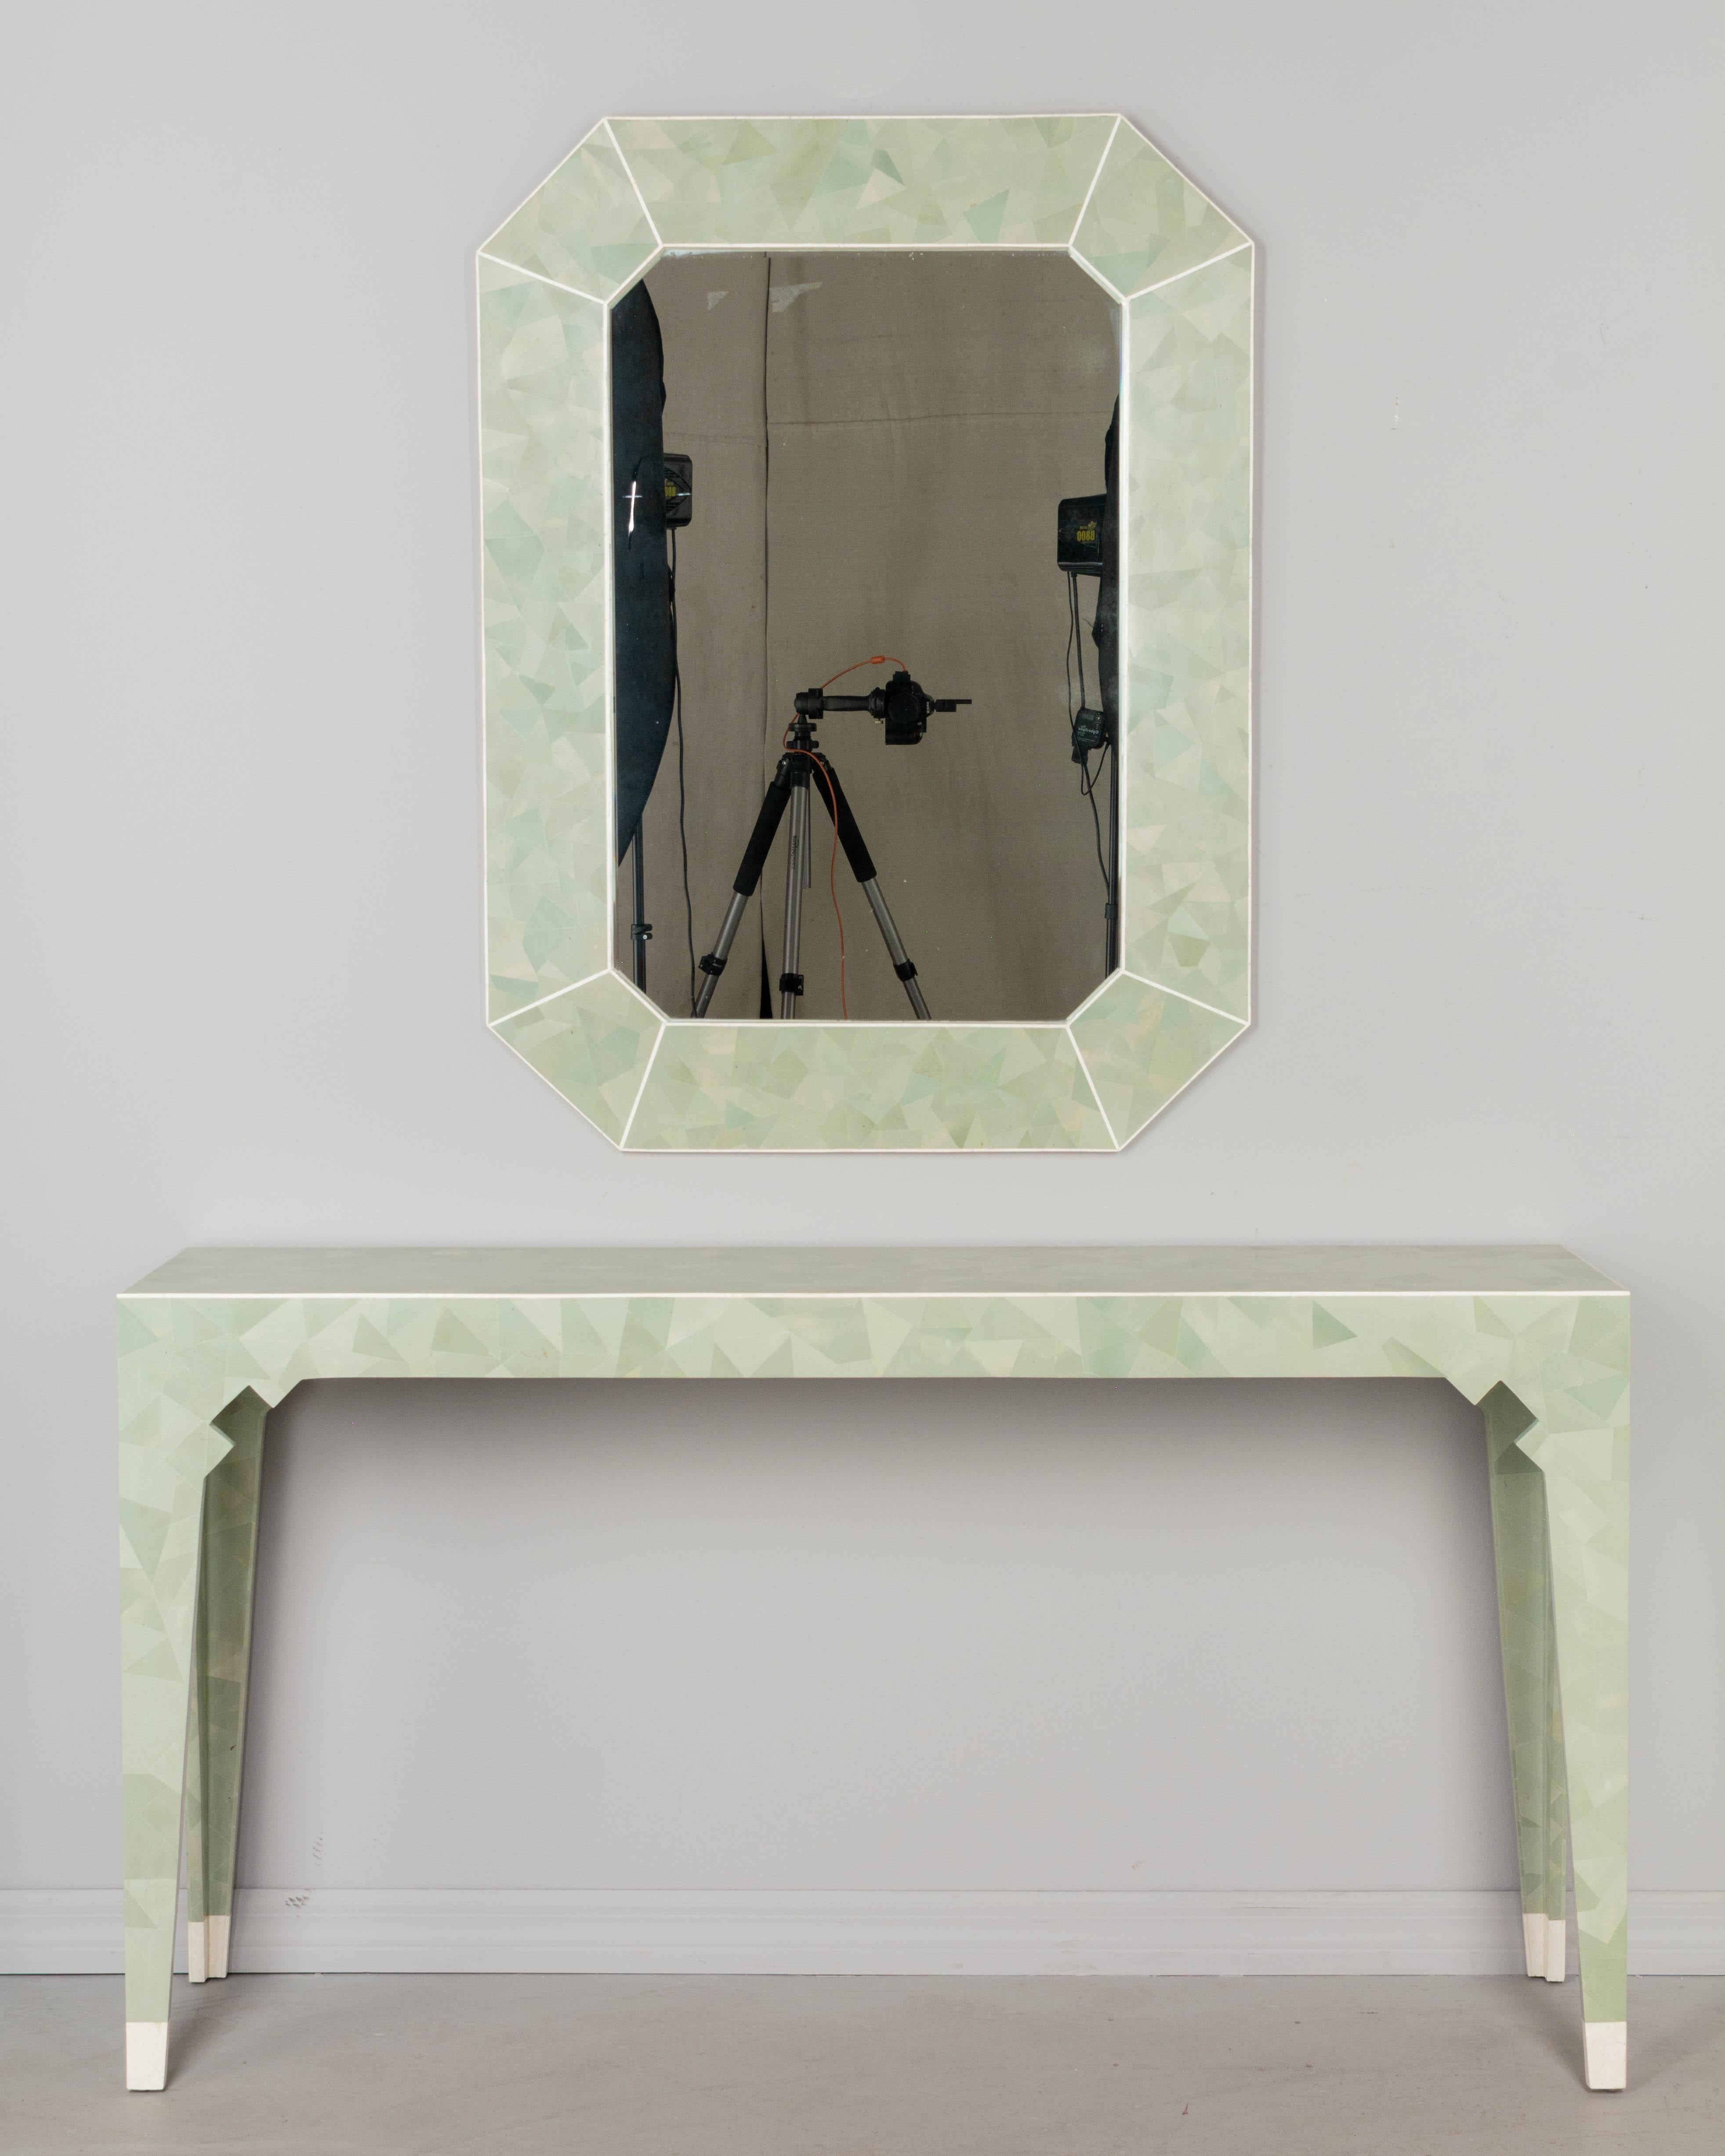 A Post Modern Italian tessellated stone wall mirror with matching narrow console table made by Oggetti. Beautiful matte finish seafoam green marble tiles, precisely cut and fitted in a triangular pattern with edges outlined in off-white marble. The